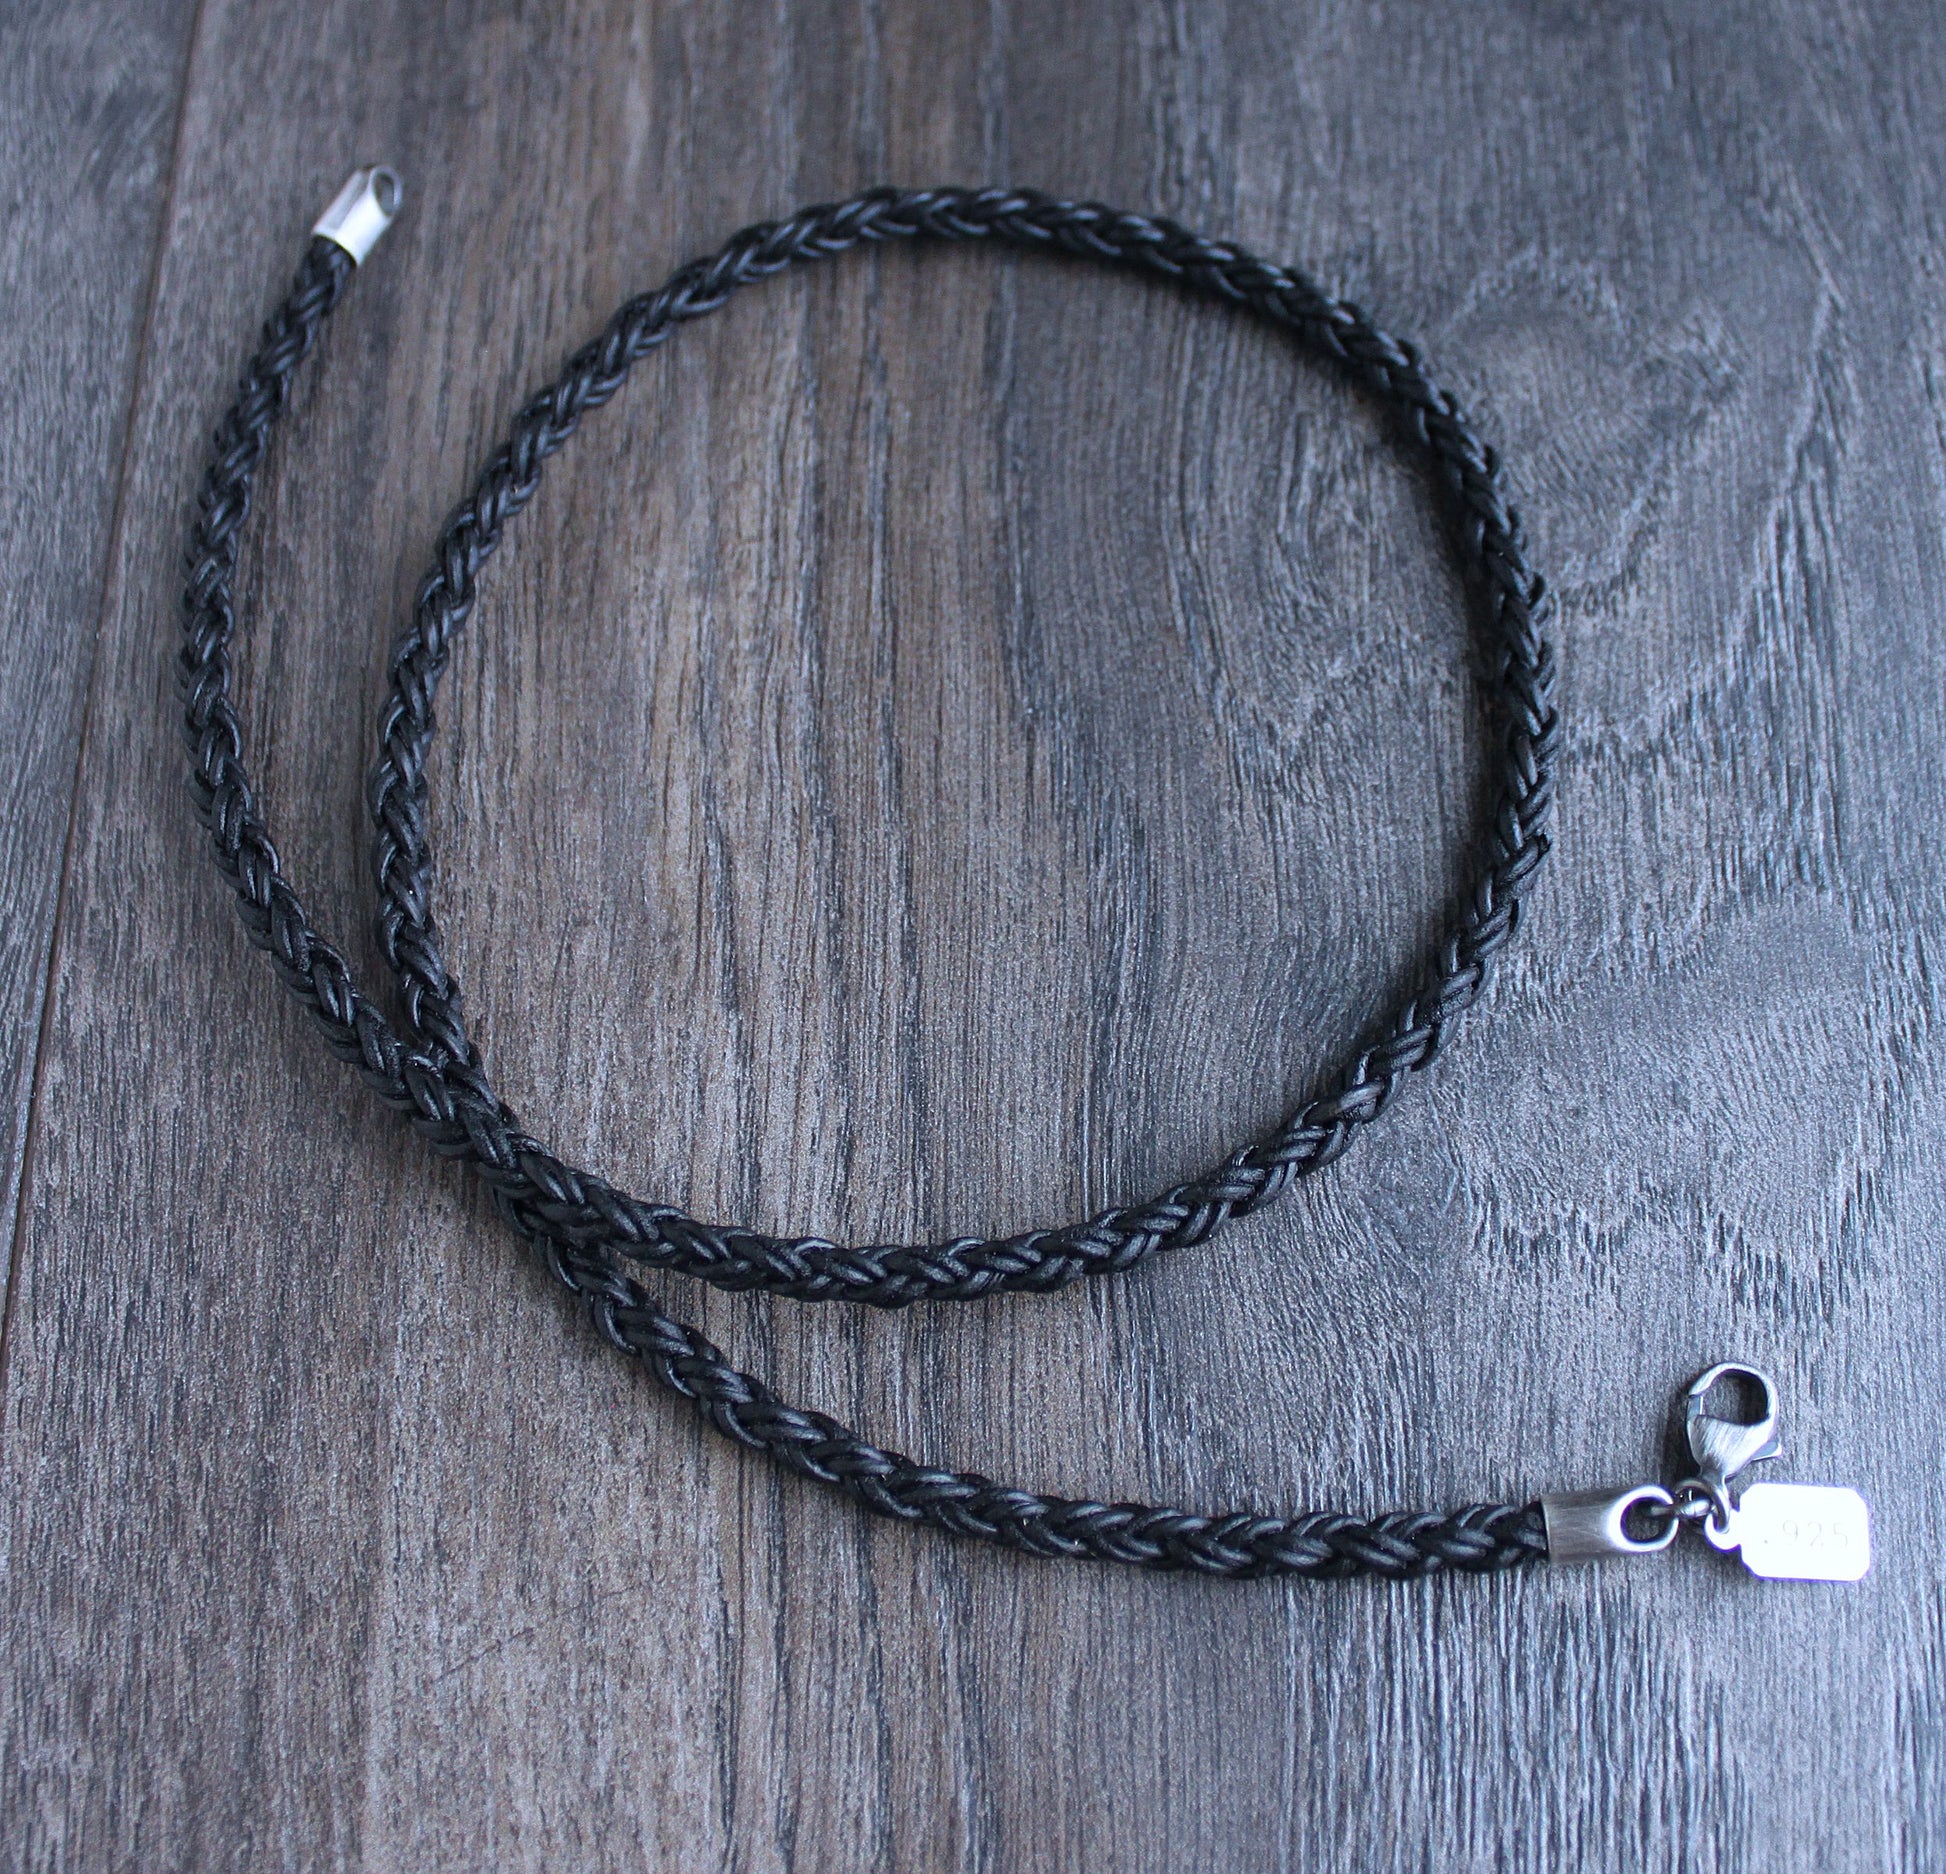 Black Braided Leather Necklace Cord